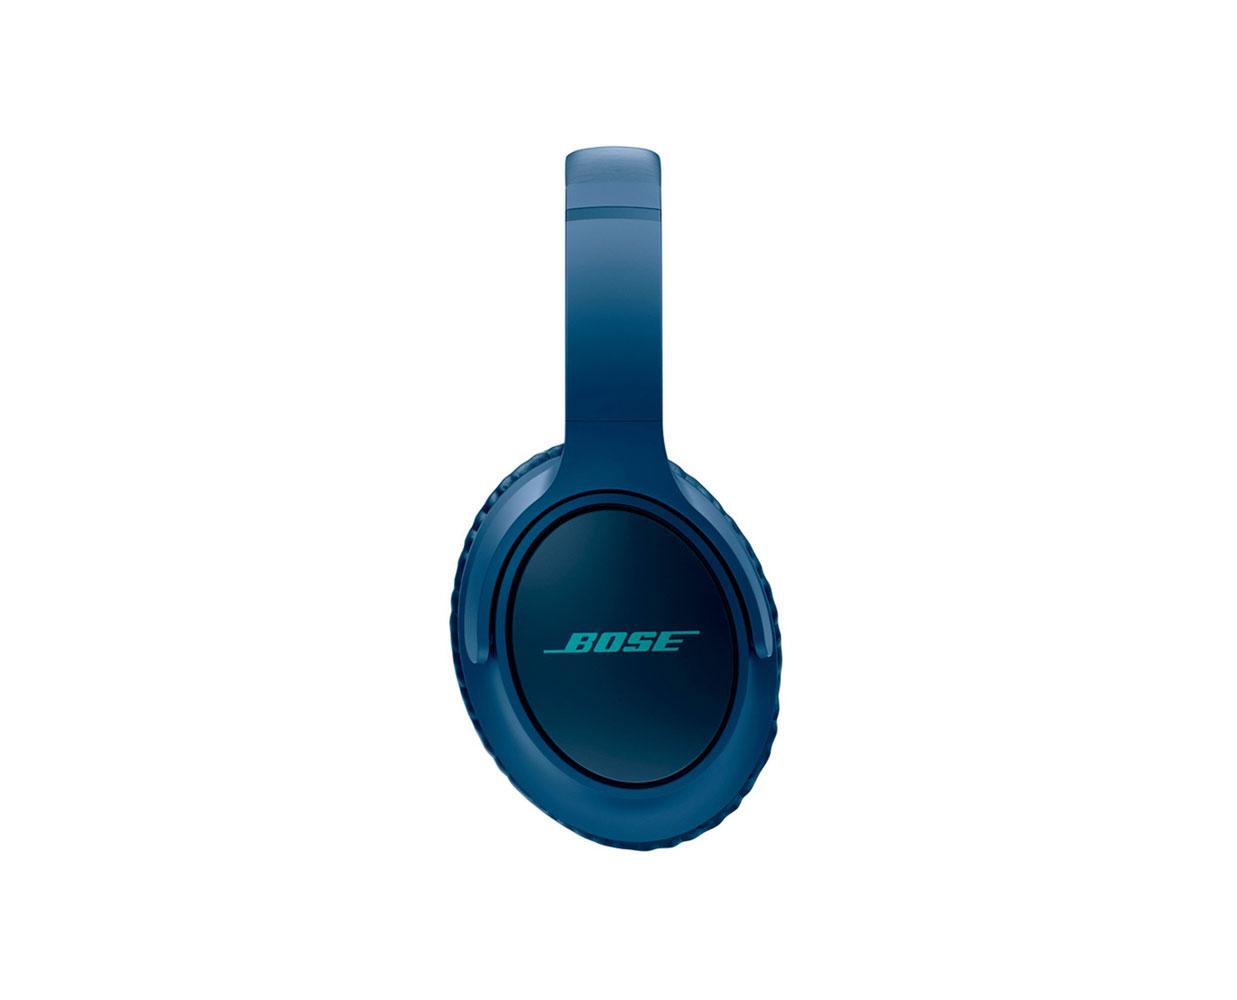 Накладные наушники Bose SoundTrue AE2 Blue for Android - фото 3 - id-p75068643